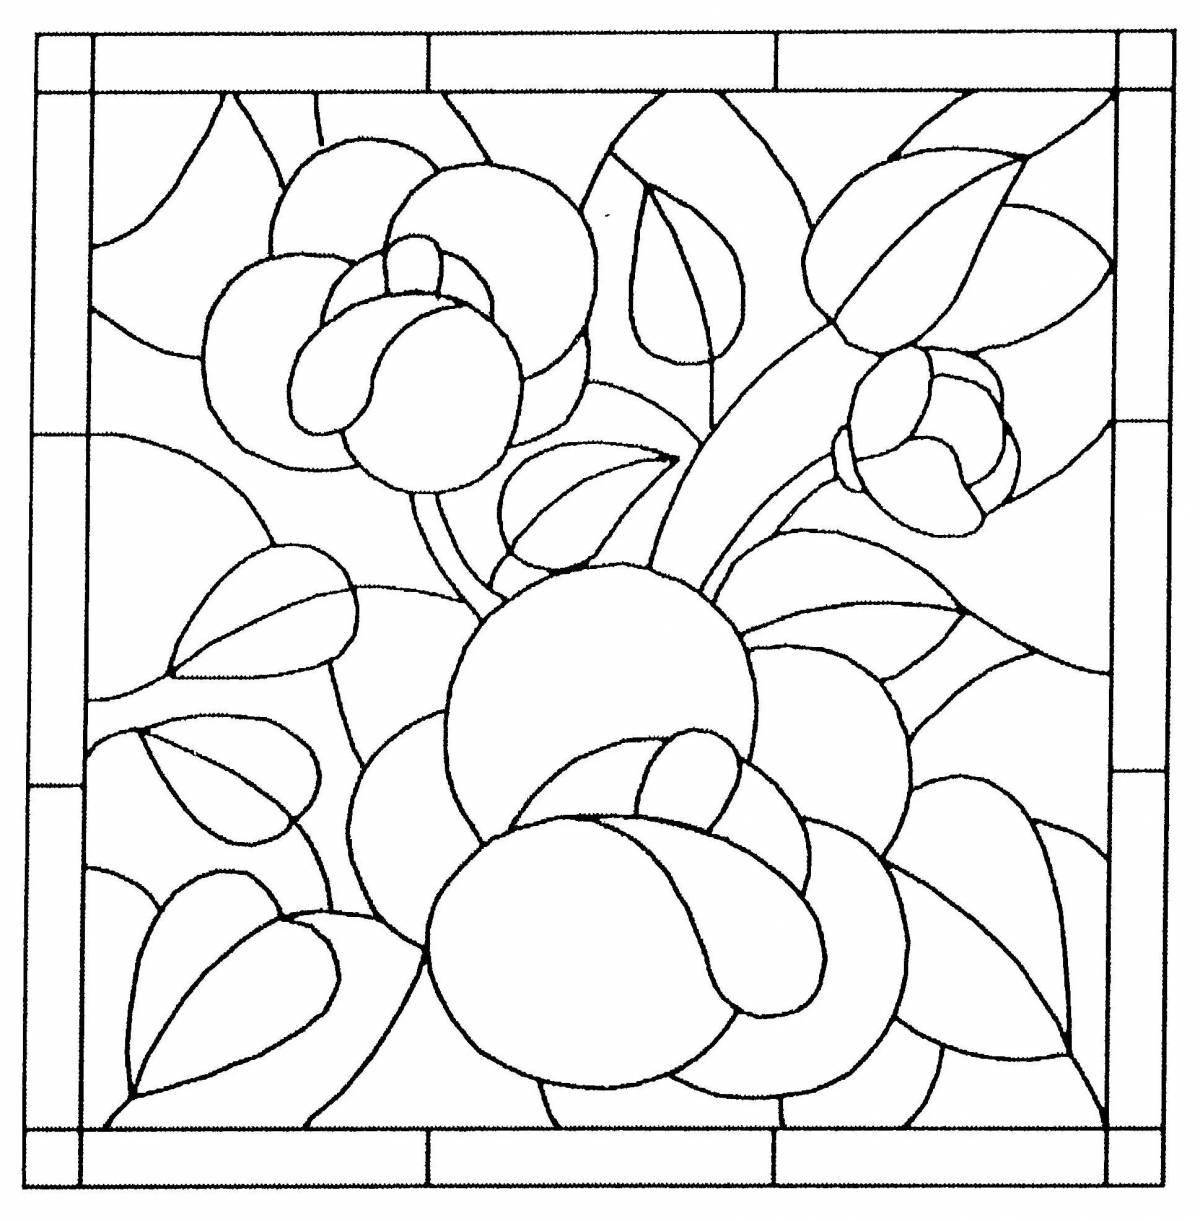 Large stained glass coloring page for kids